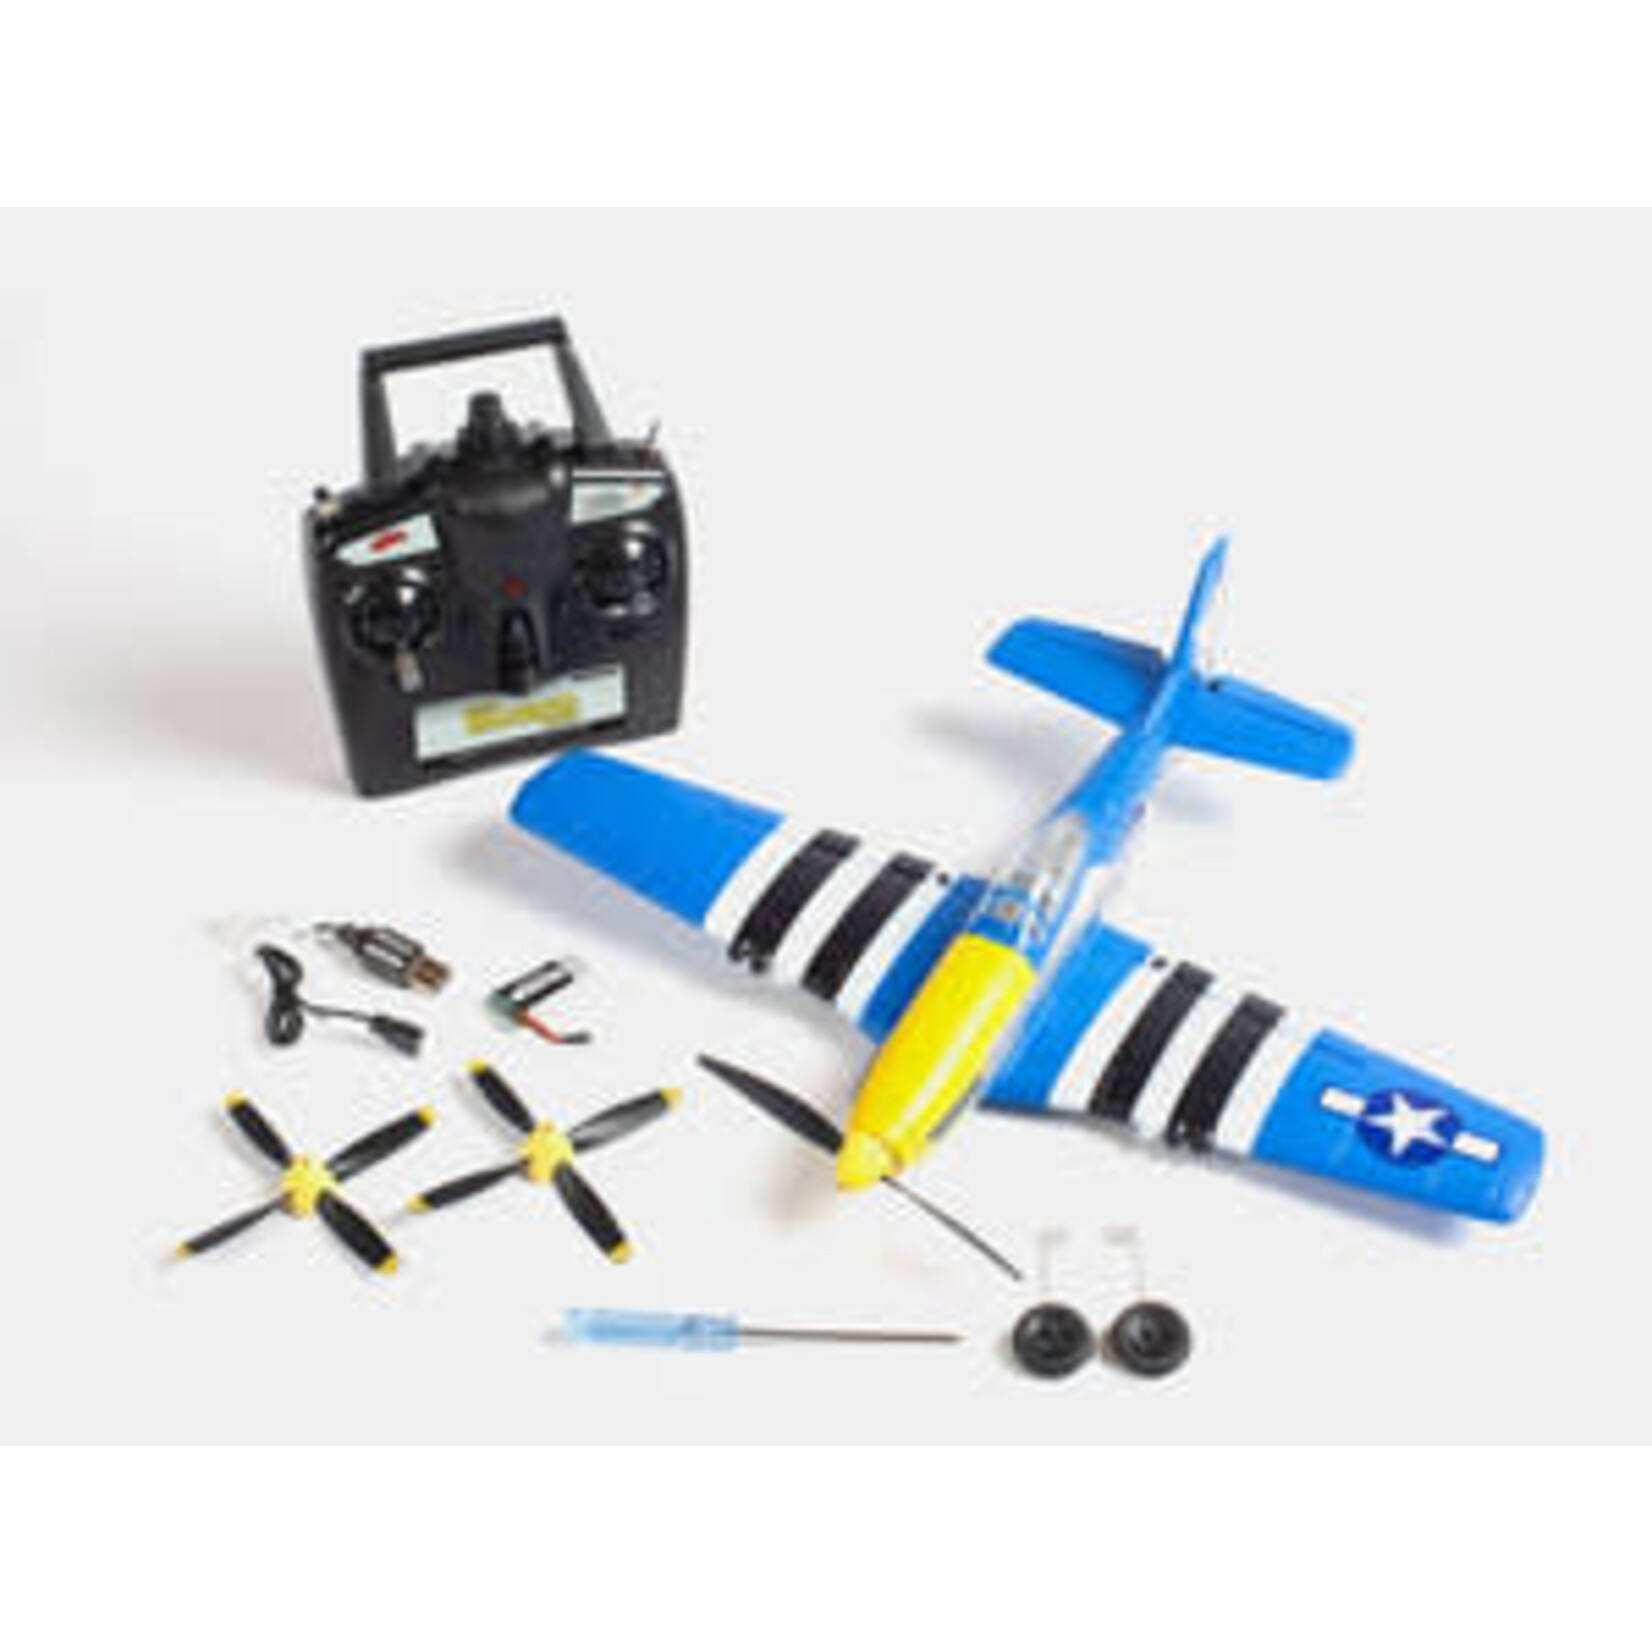 Eflite RGRA1300V2  P-51D Obsession Micro RTF Airplane with PASS (Pilot Assist Stability Software) System